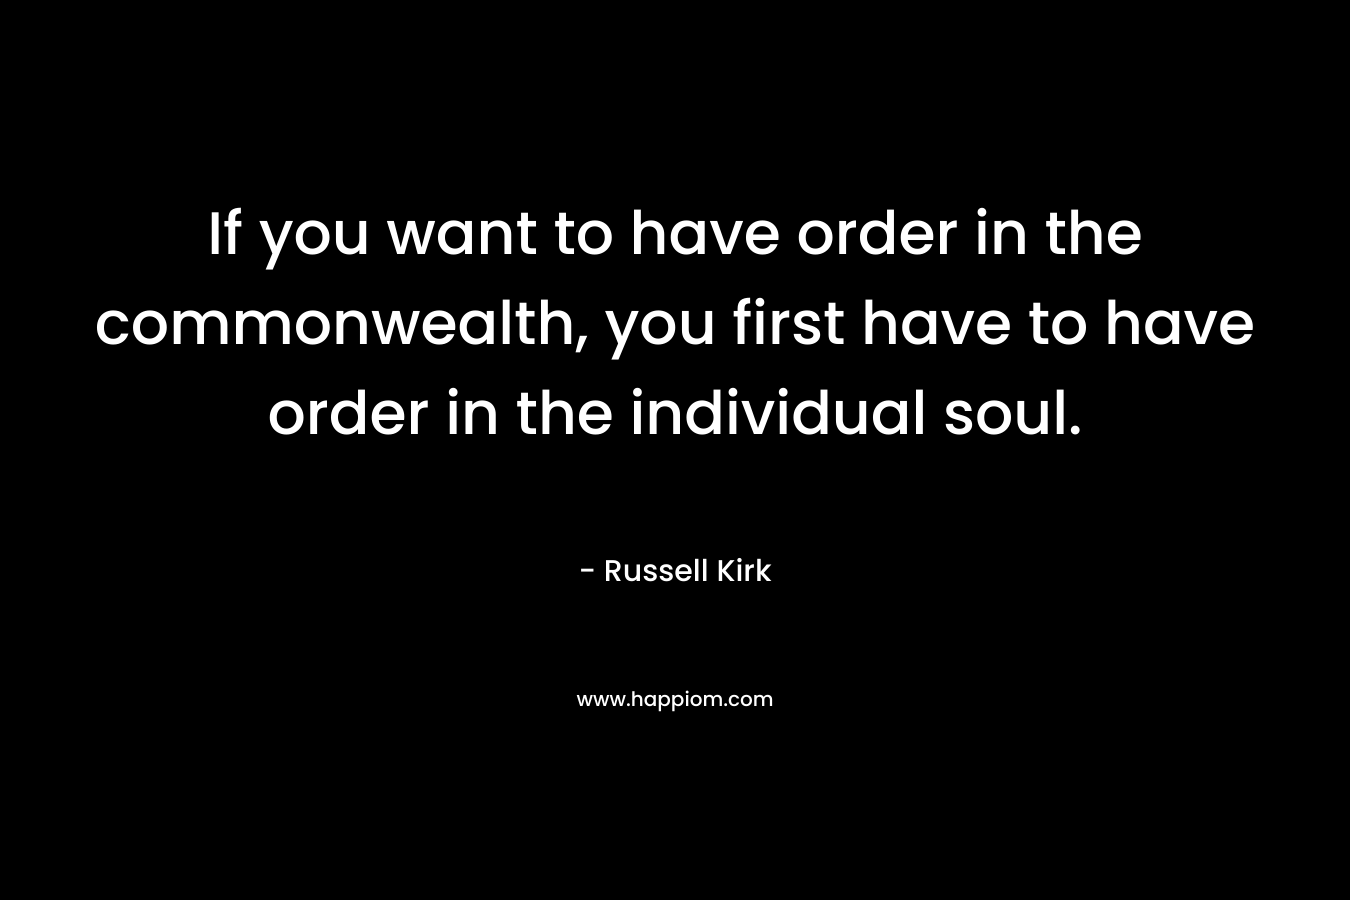 If you want to have order in the commonwealth, you first have to have order in the individual soul.